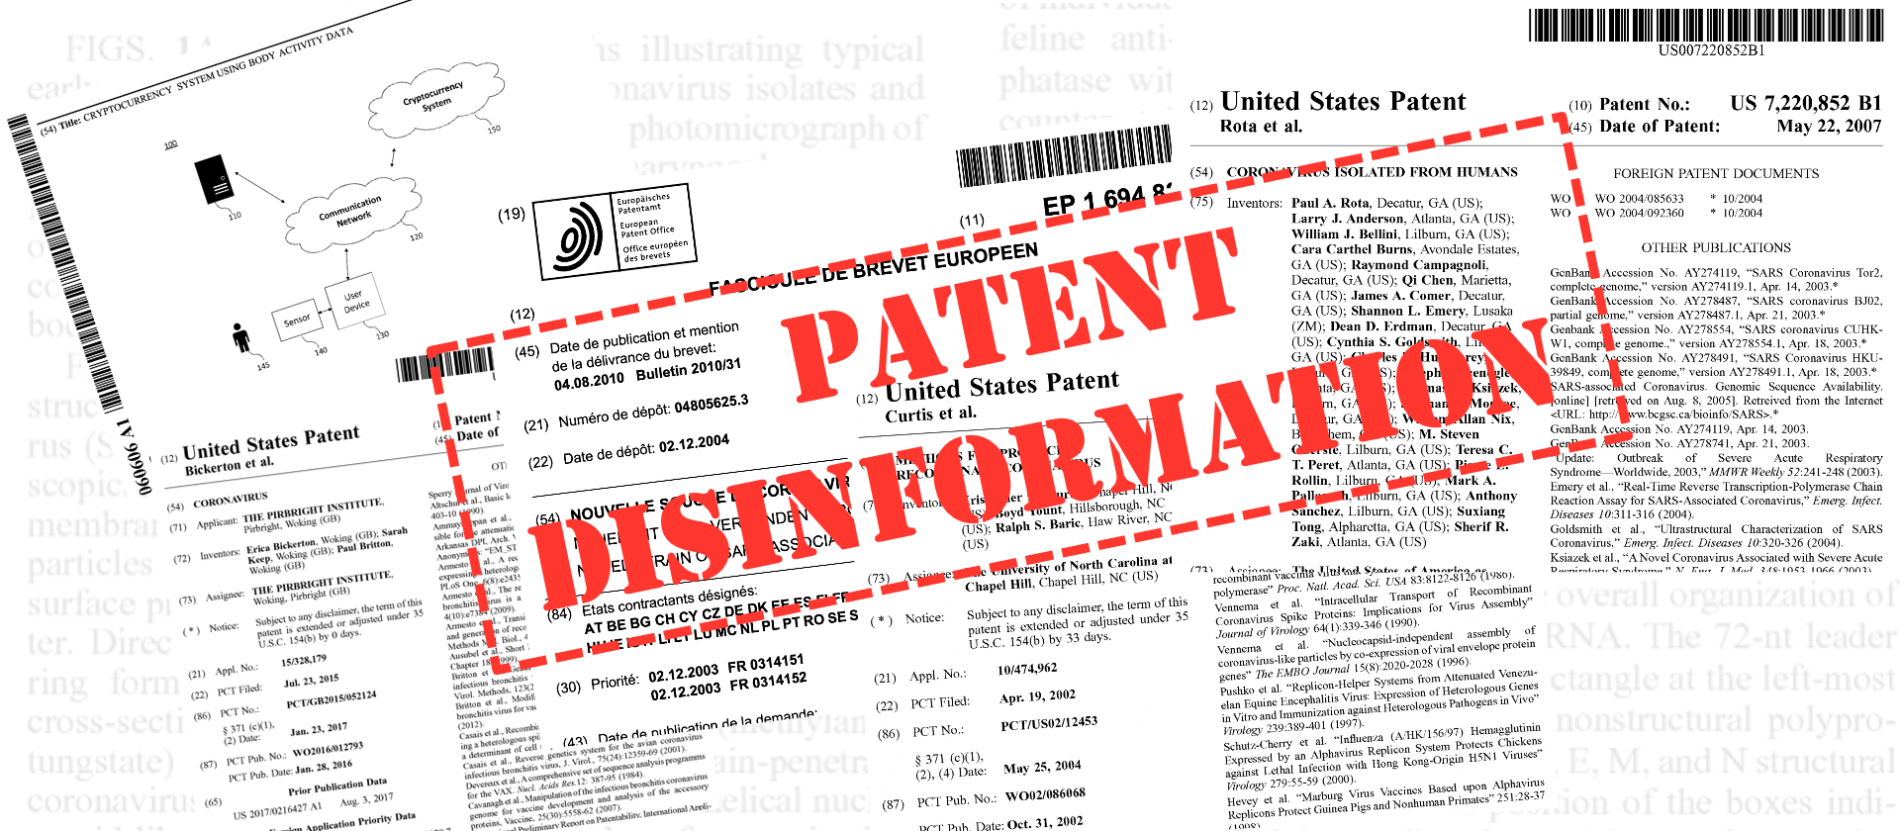 Google Patents Public Datasets: connecting public, paid, and private patent  data - Google Cloud Blog